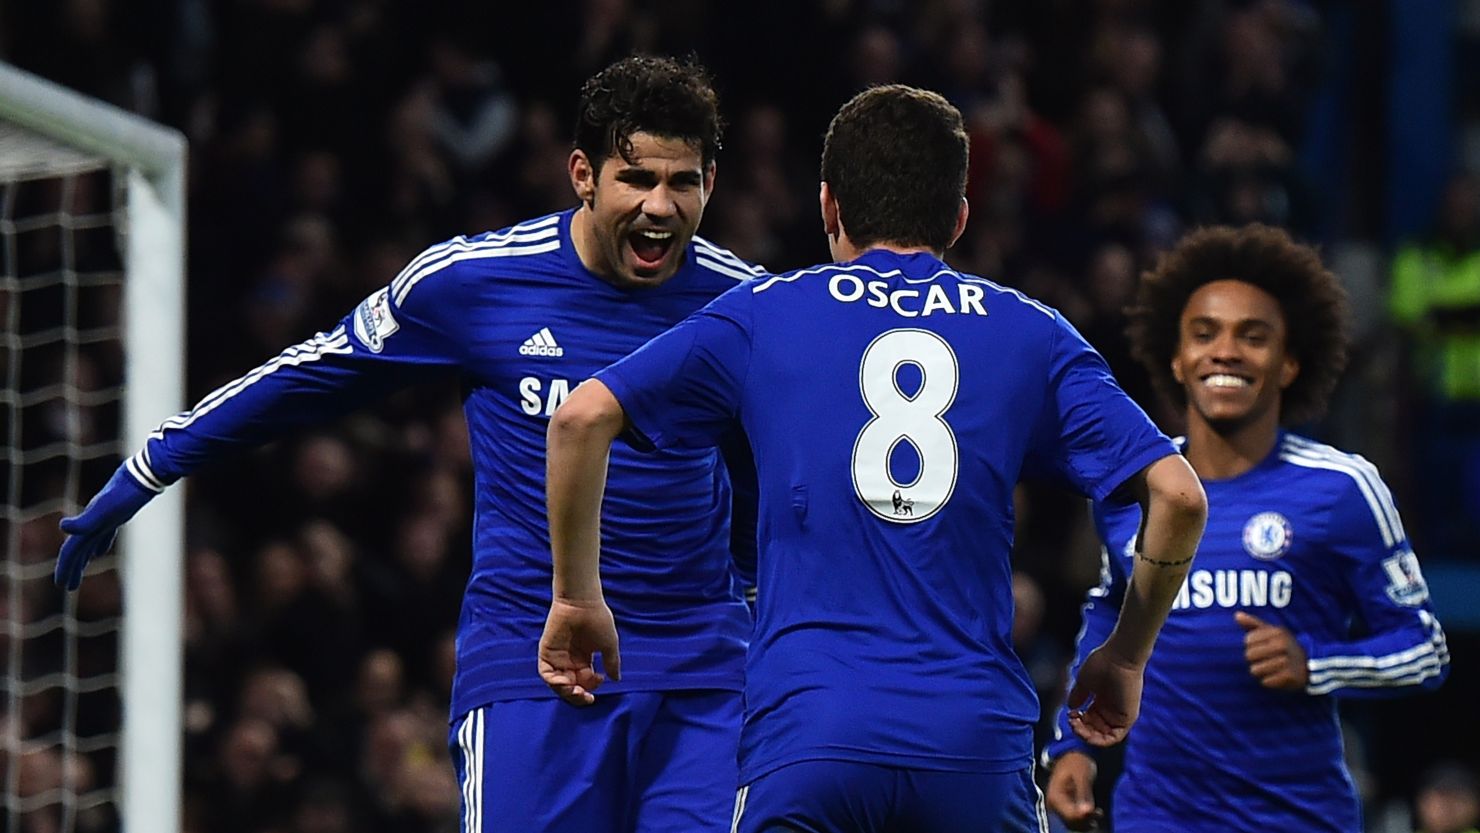 Diego Costa and Oscar celebrate as Chelsea defeat Newcastle United at Stamford Bridge.